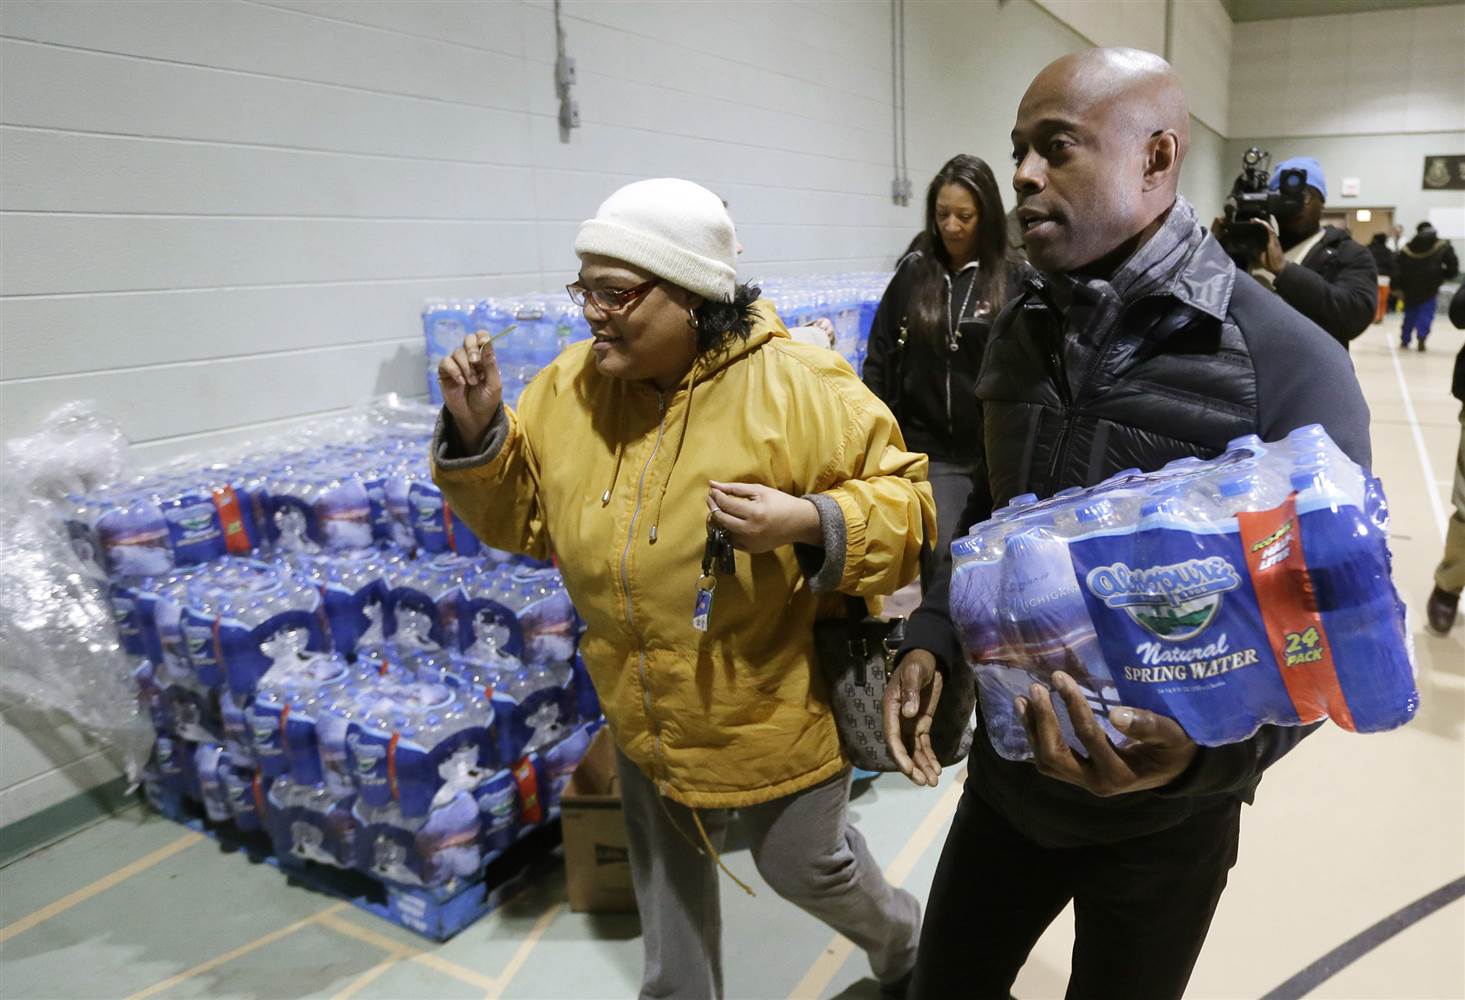 Flint's council still haven't found a long term solution to the water crisis